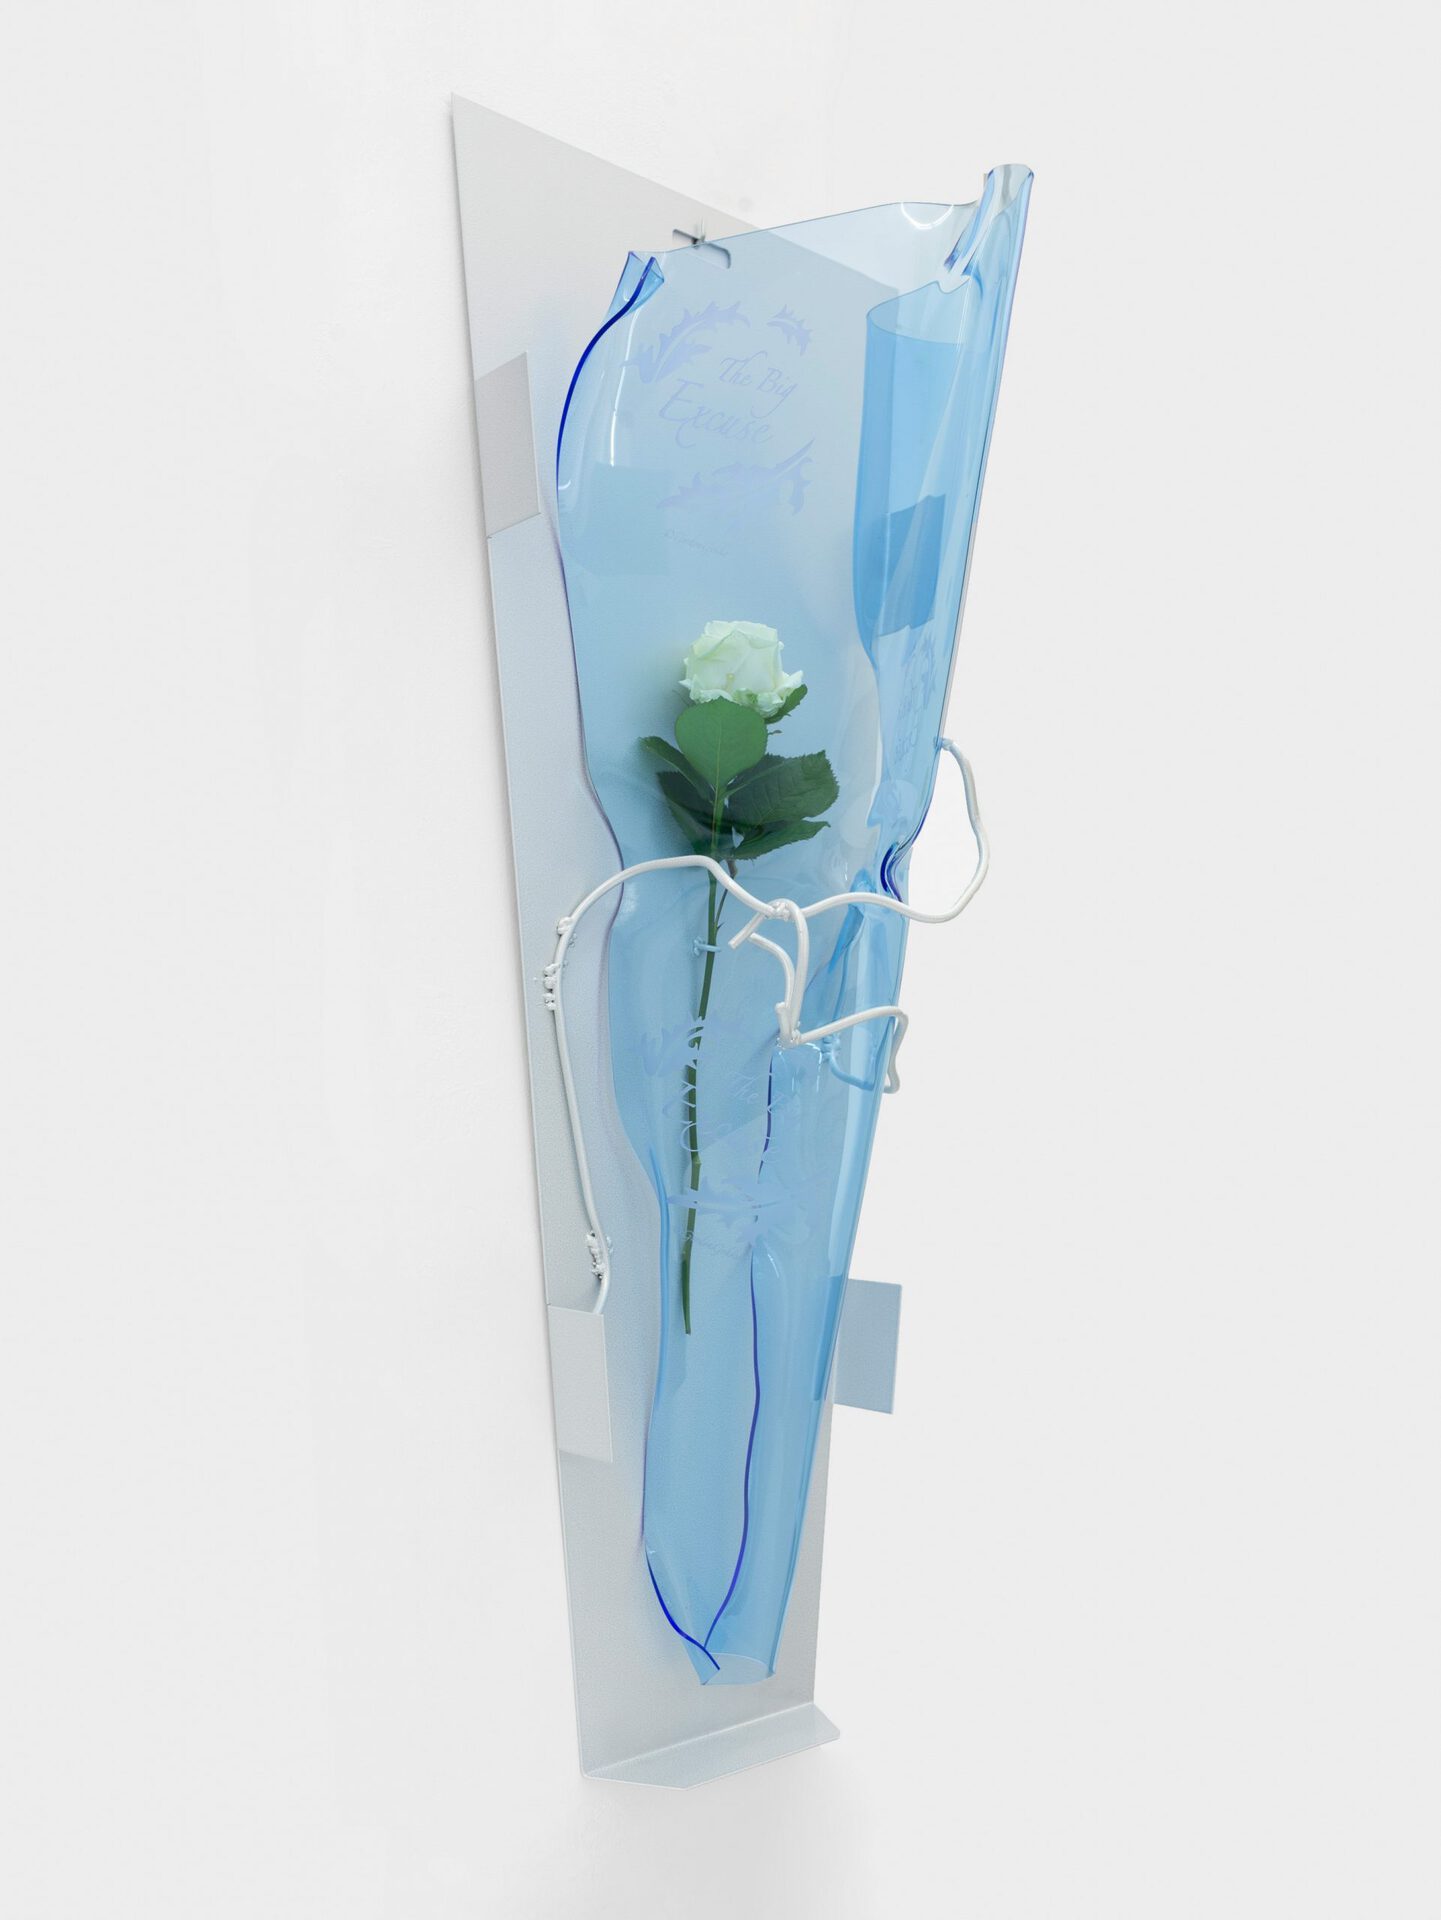 Hannah Sophie Dunkelberg, THE BIG EXCUSE (Fri.), 2022, powdercoated metal, acrylic, glass, dried rose, 104 x 40 x 30 cm. Courtesy of the artist and Gunia Nowik Gallery.